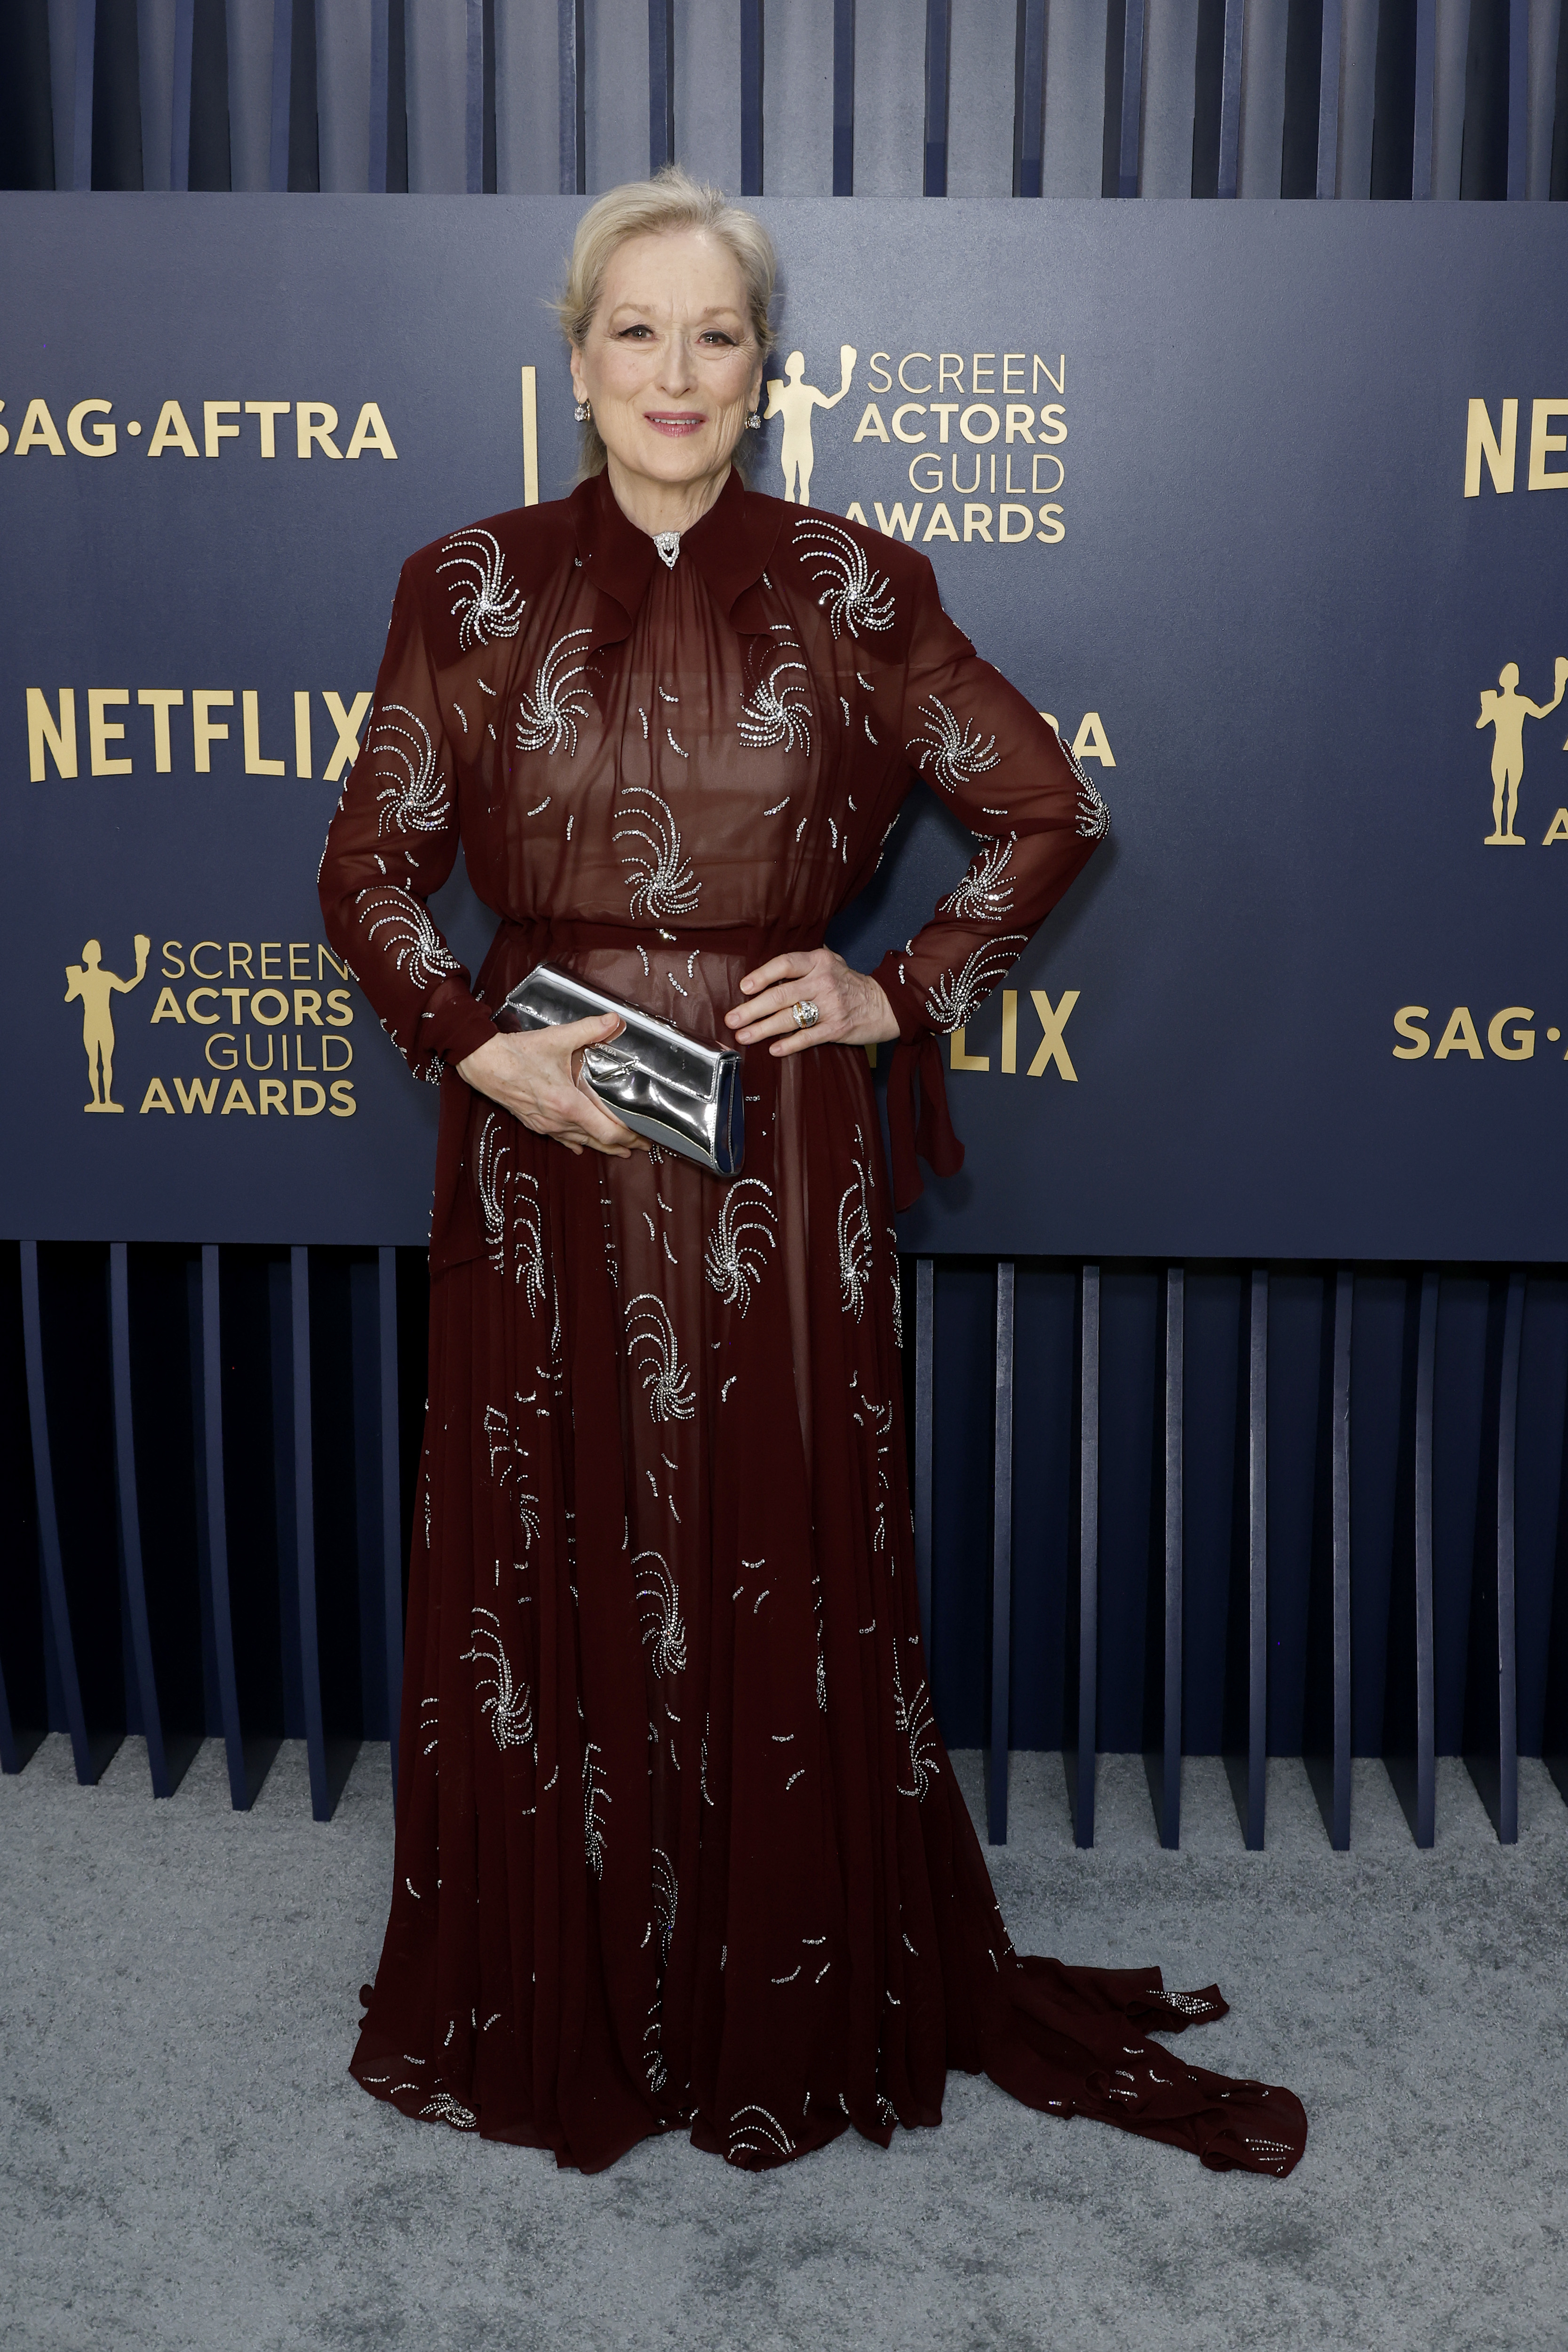 Meryl in a long-sleeved, floor-length gown with swirling patterns, posing with a clutch at an awards event